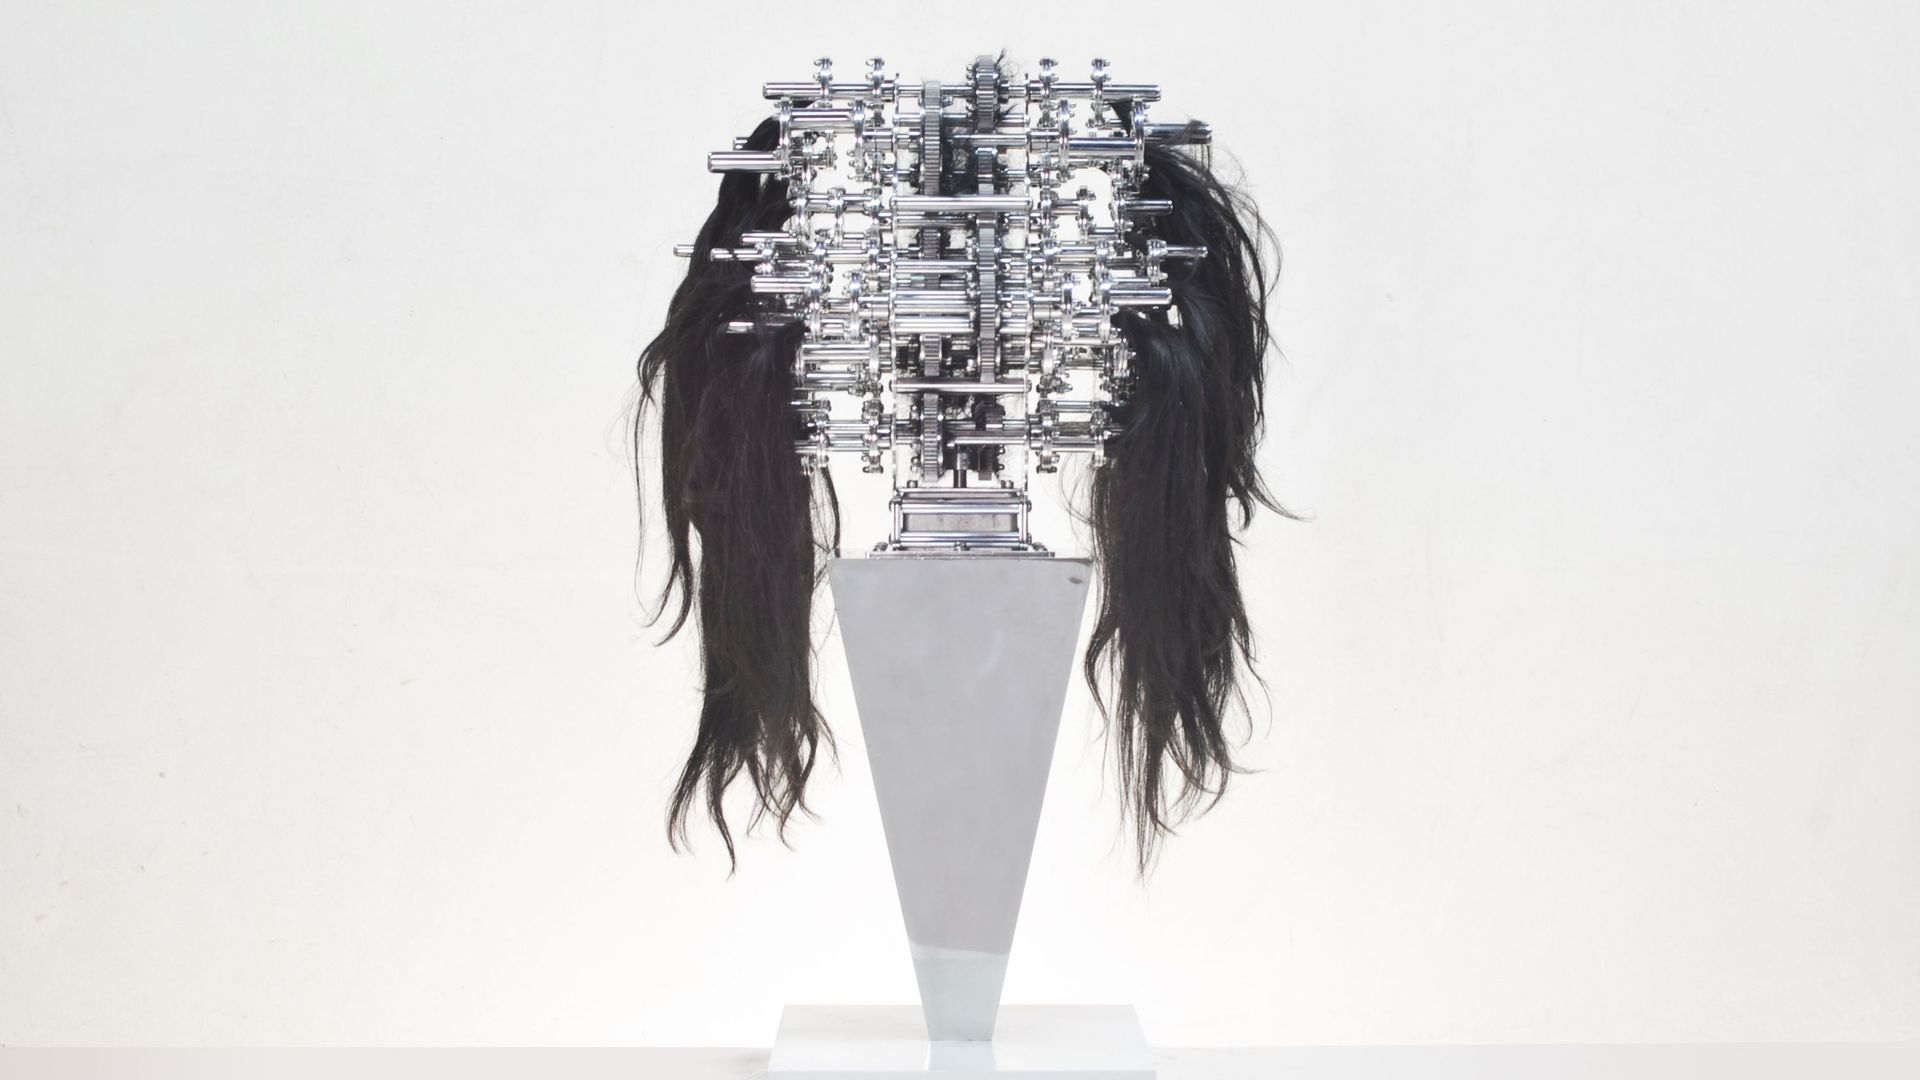 Machine with hair caught in it, Ujoo + limheeyoung - Hyper Organisms iMAL 2021